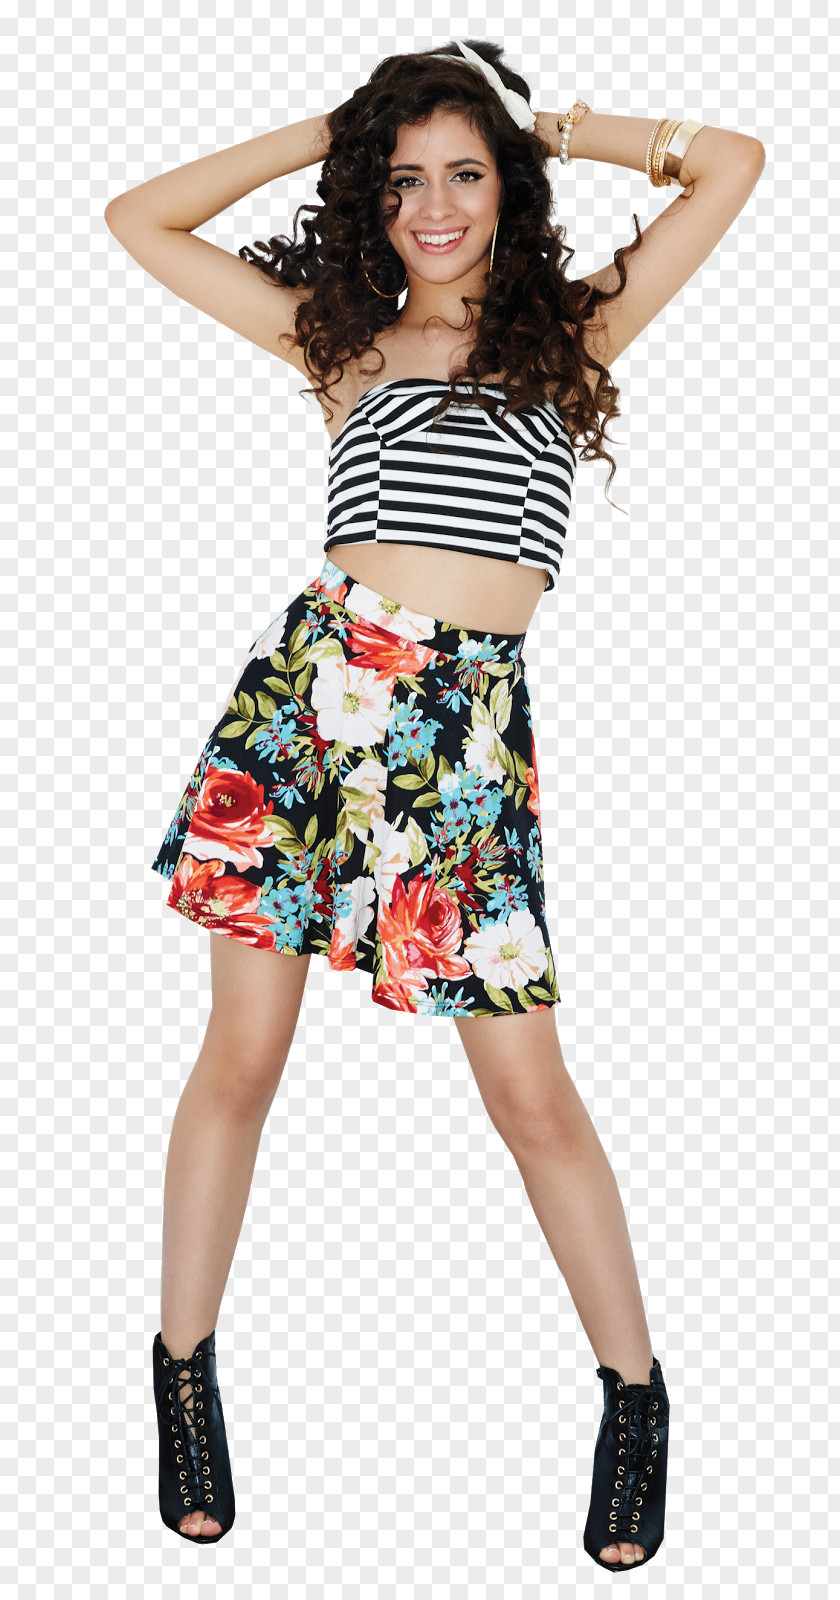 Fifth Harmony Camila Cabello Wet Seal Clothing PNG